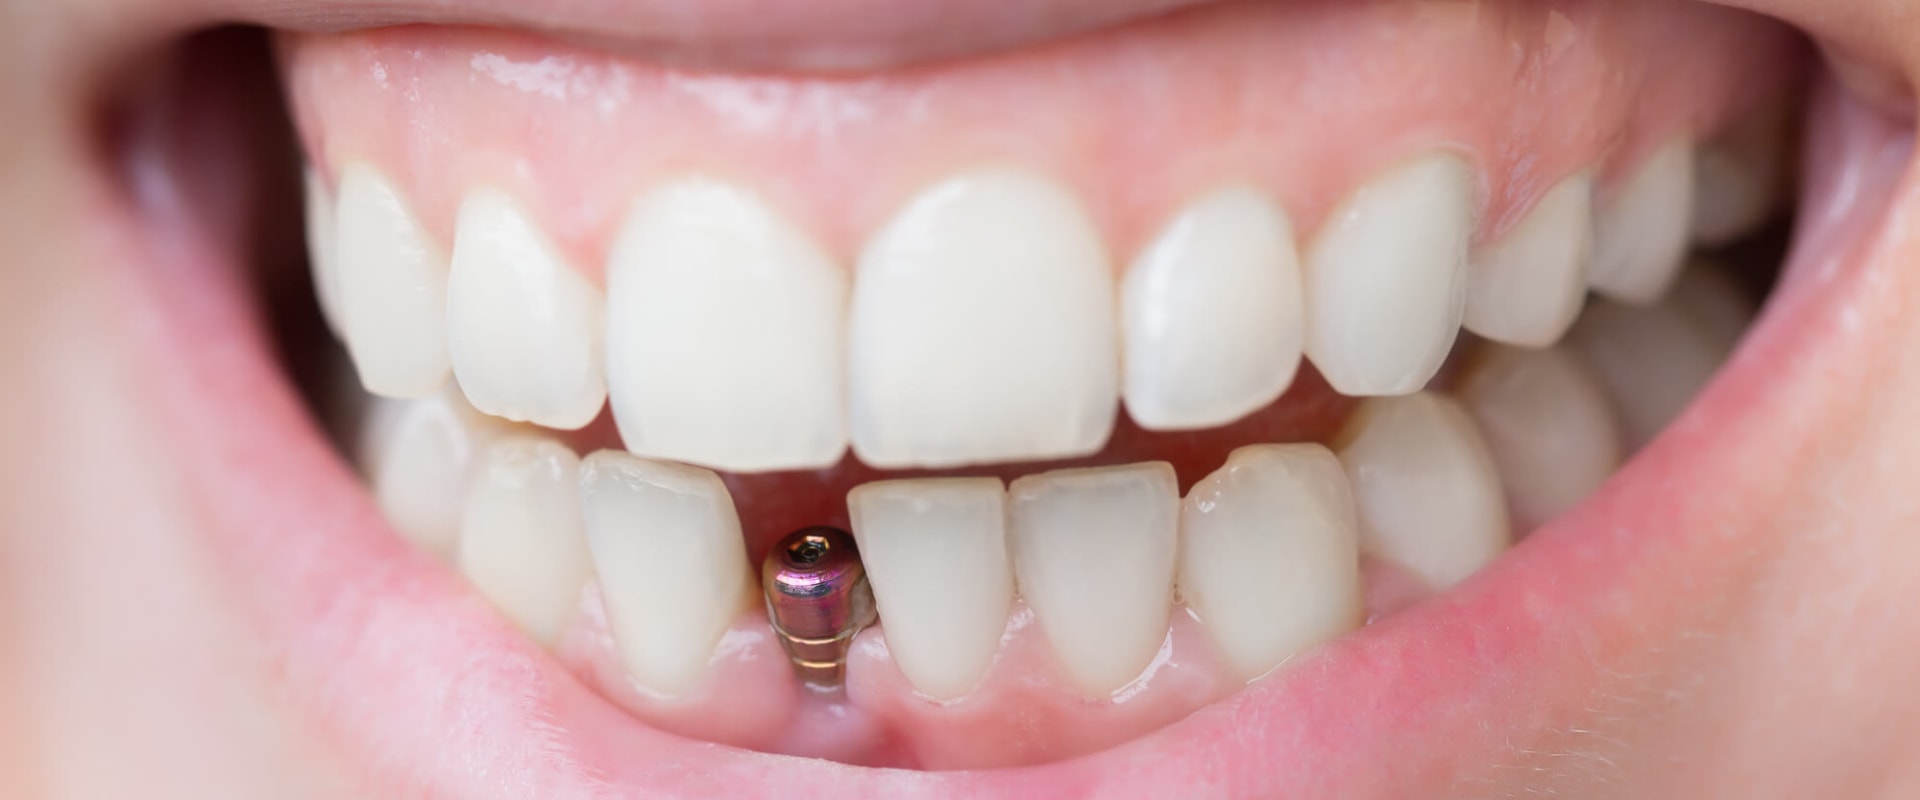 When is a dental implant needed?